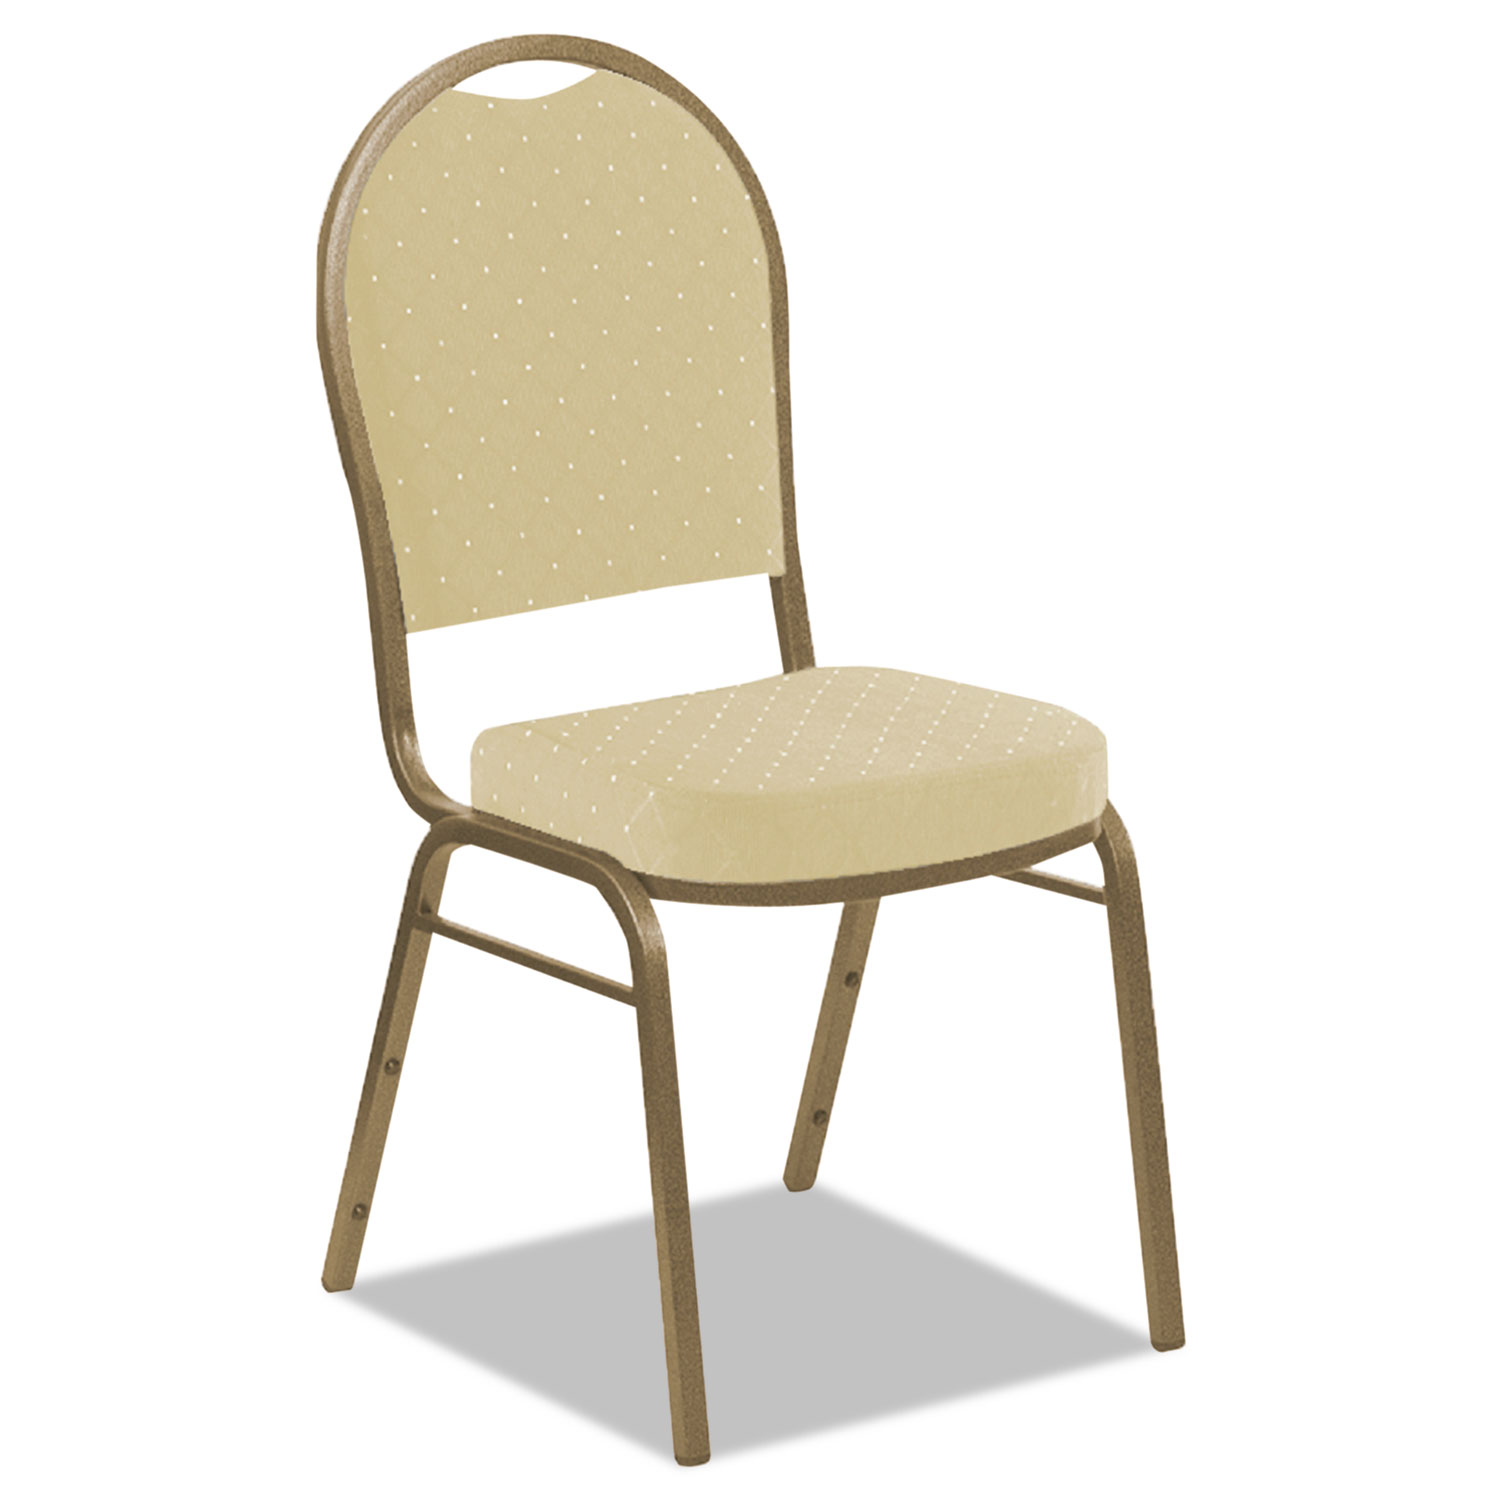 Banquet Chairs with Dome Back, Tan/Gold, 4/Carton